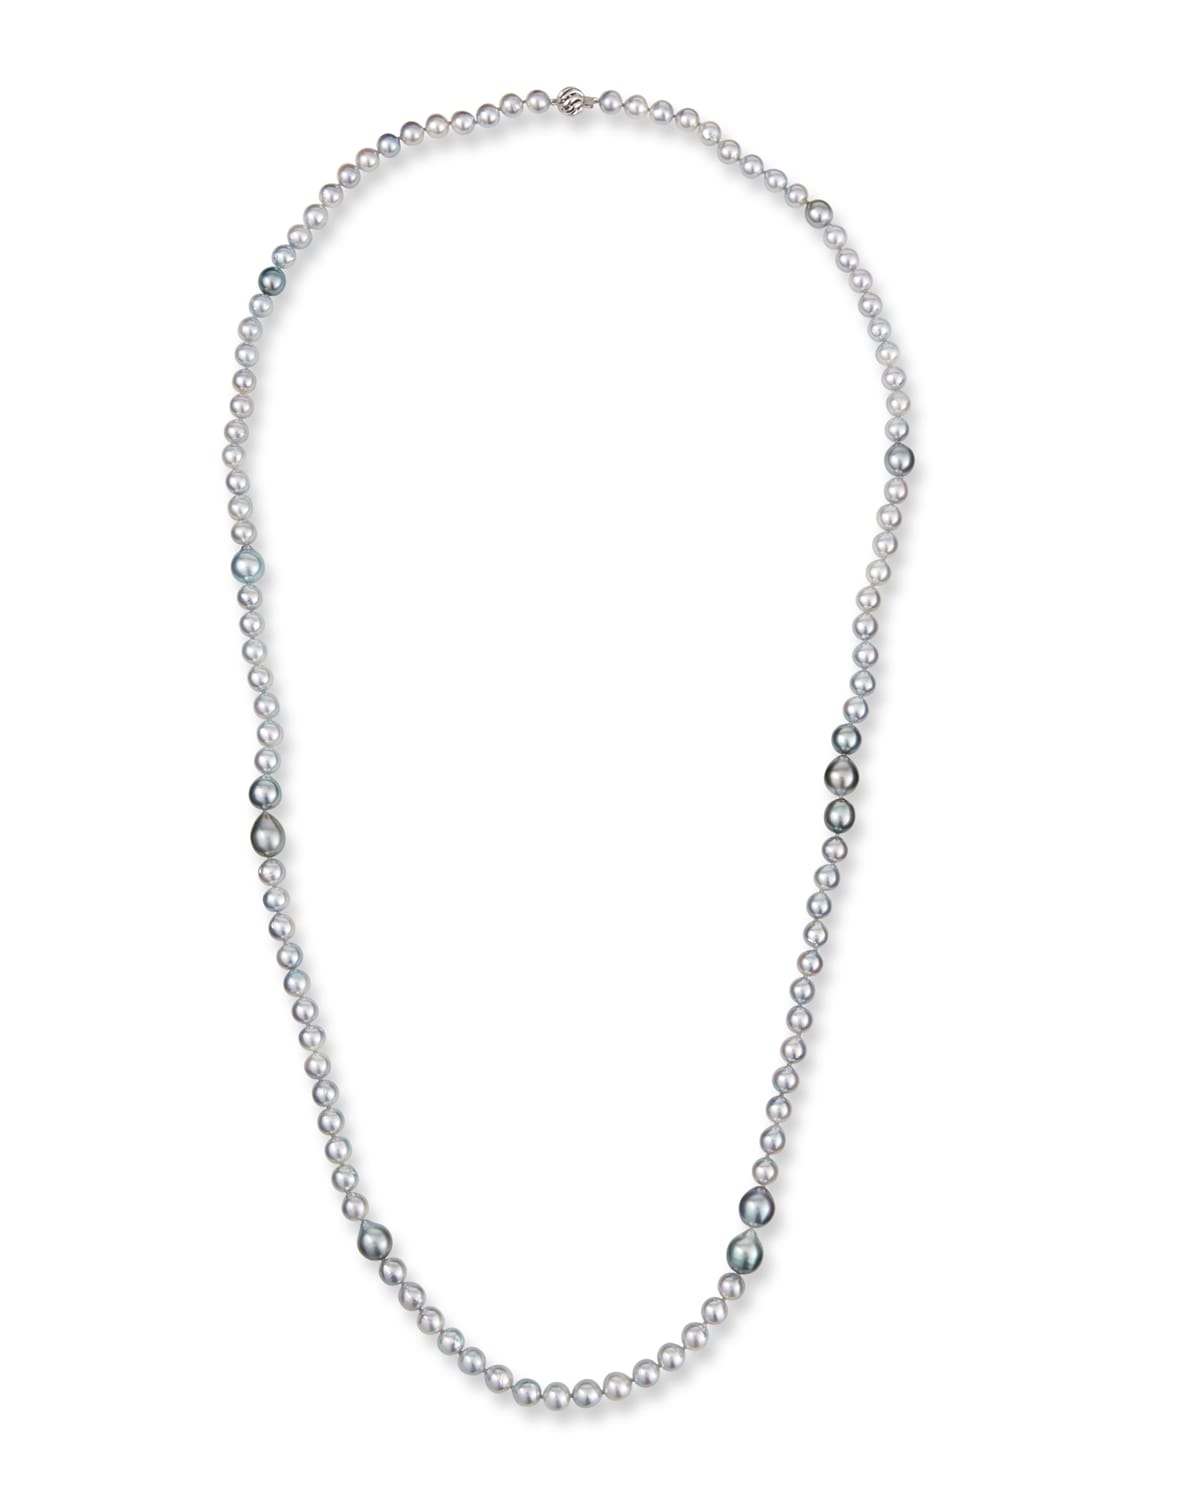 Belpearl 18k White Gold Long Silver, Blue & Gray Pearl Necklace, 40"L